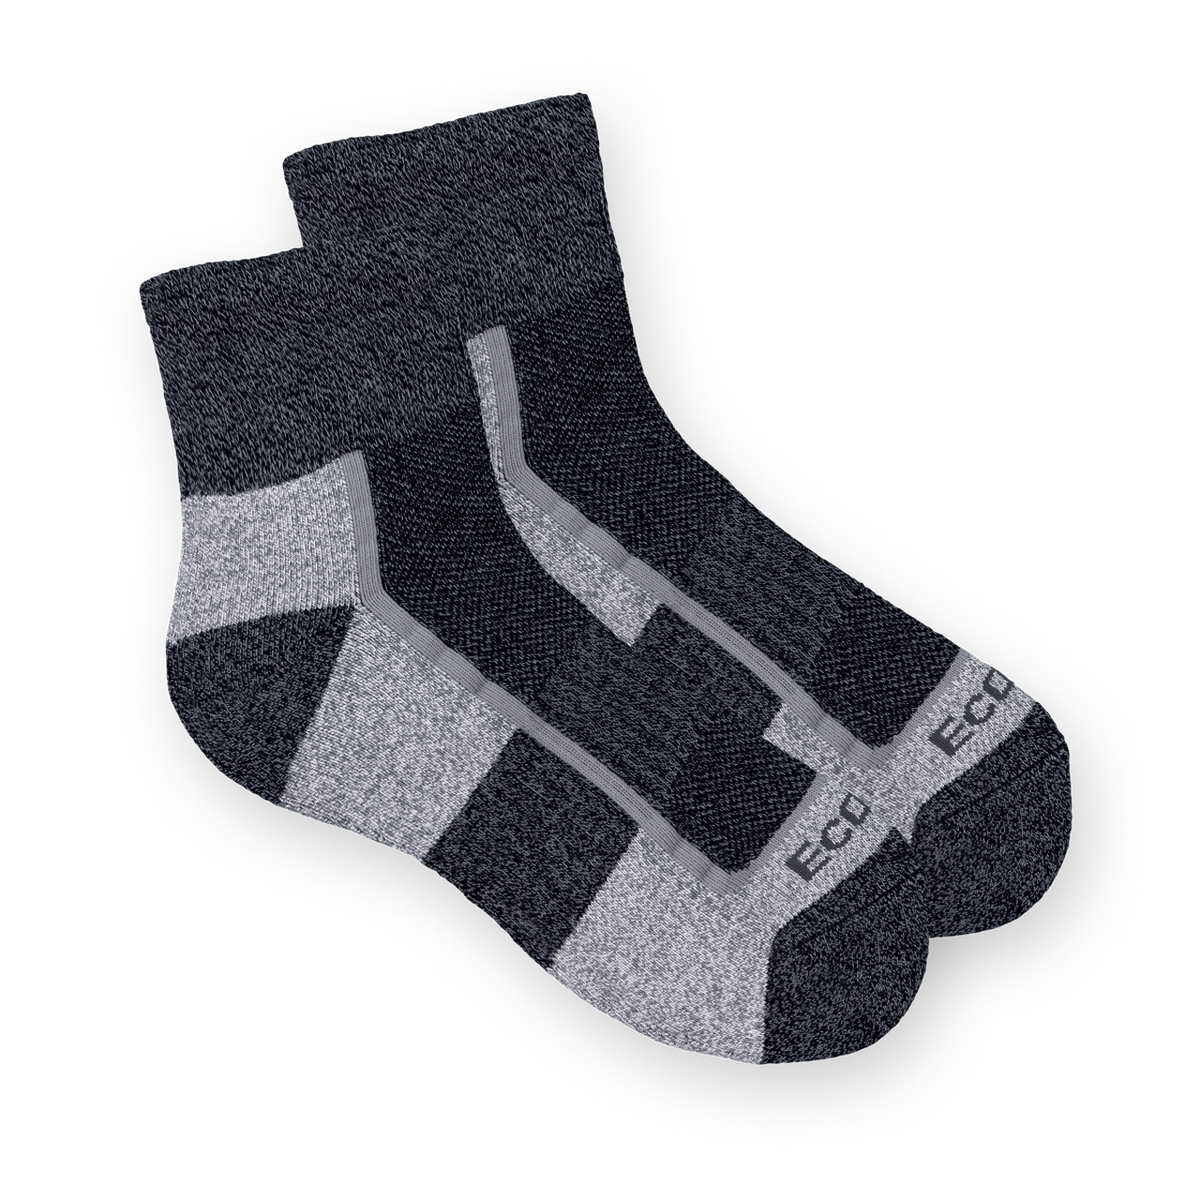 EcoSox Diabetic Bamboo Light Hiking Quarter height sock in black and gray. Socks shown laying flat. 